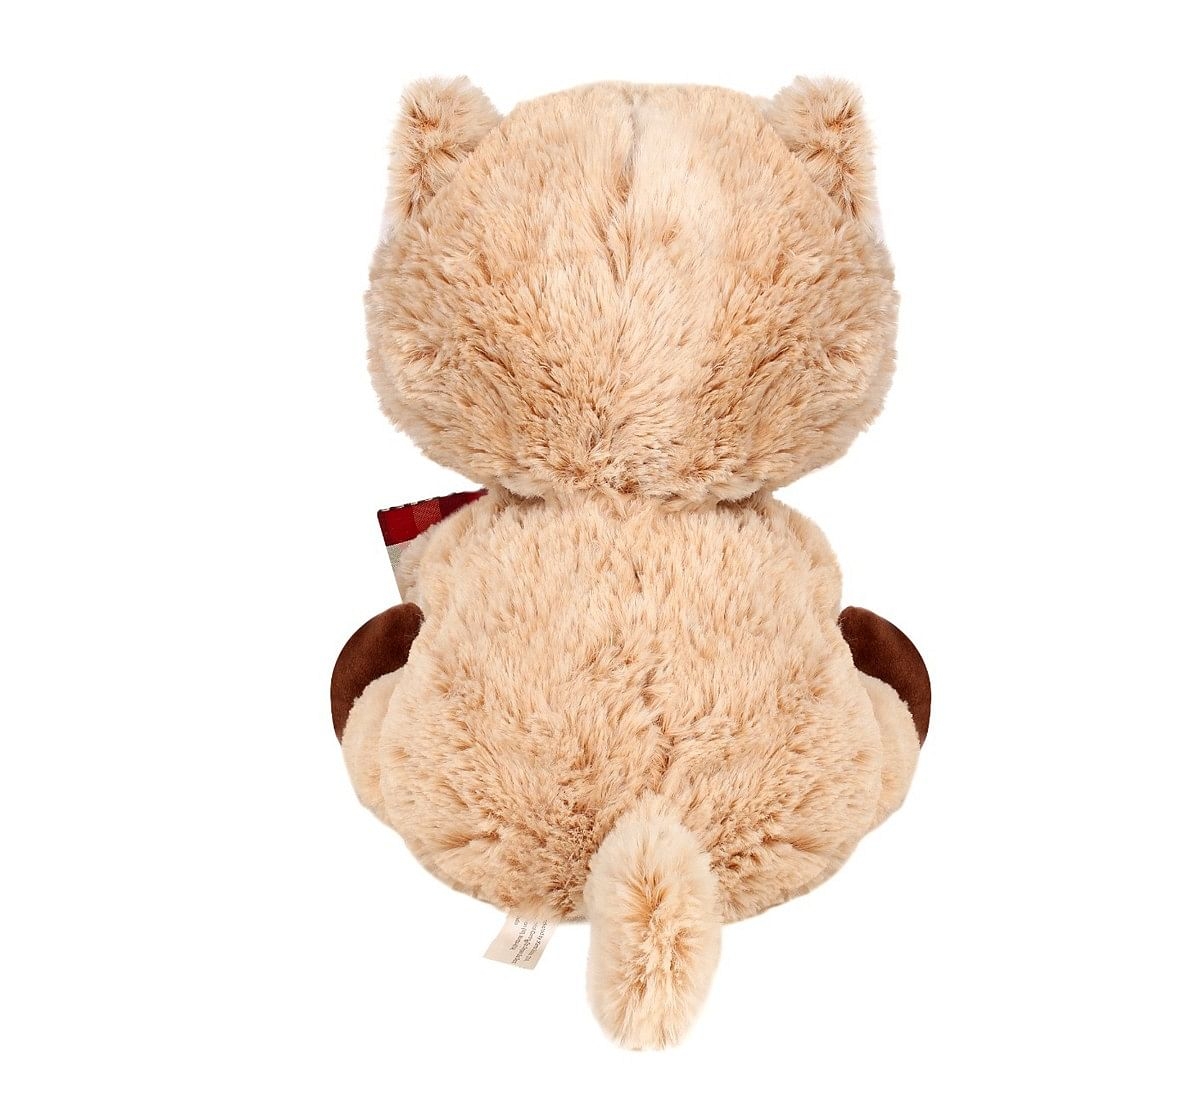 Sophie Brown Cat Plush Toy, 24Cm  Quirky Soft Toys for Kids age 3Y+ - 24 Cm (Brown)